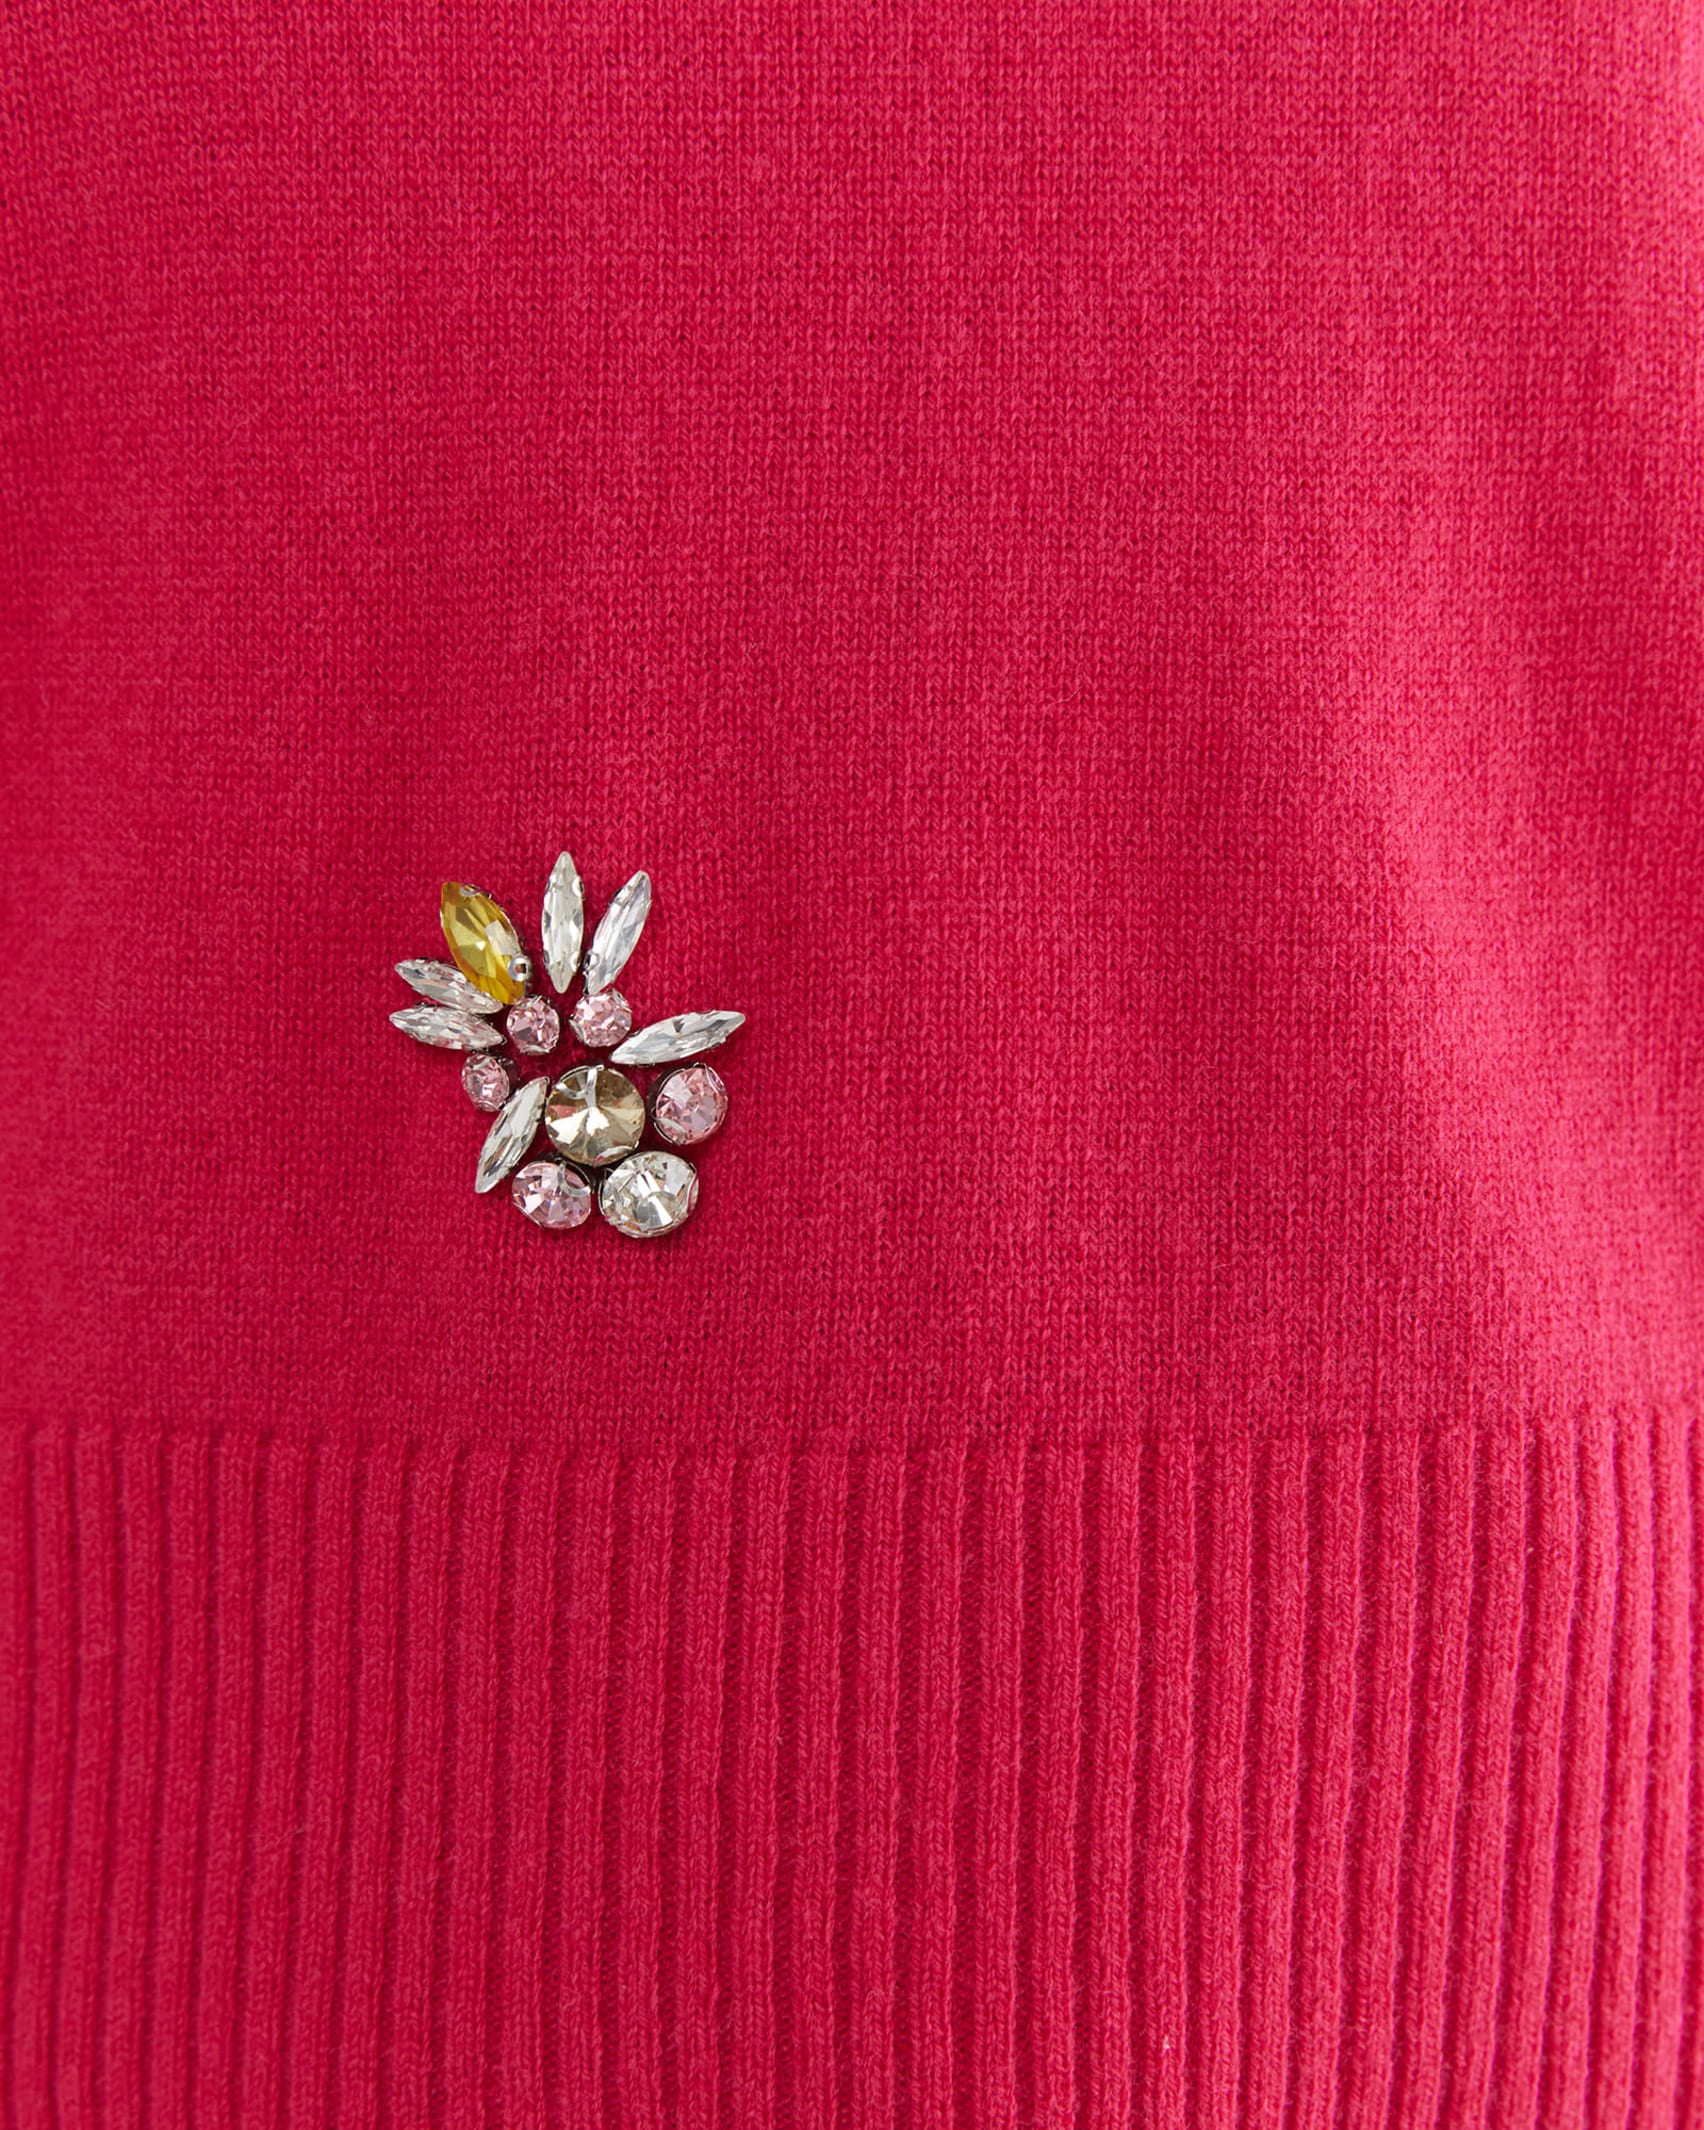 Sunshine Embellished Sweater in BRIGHT PINK